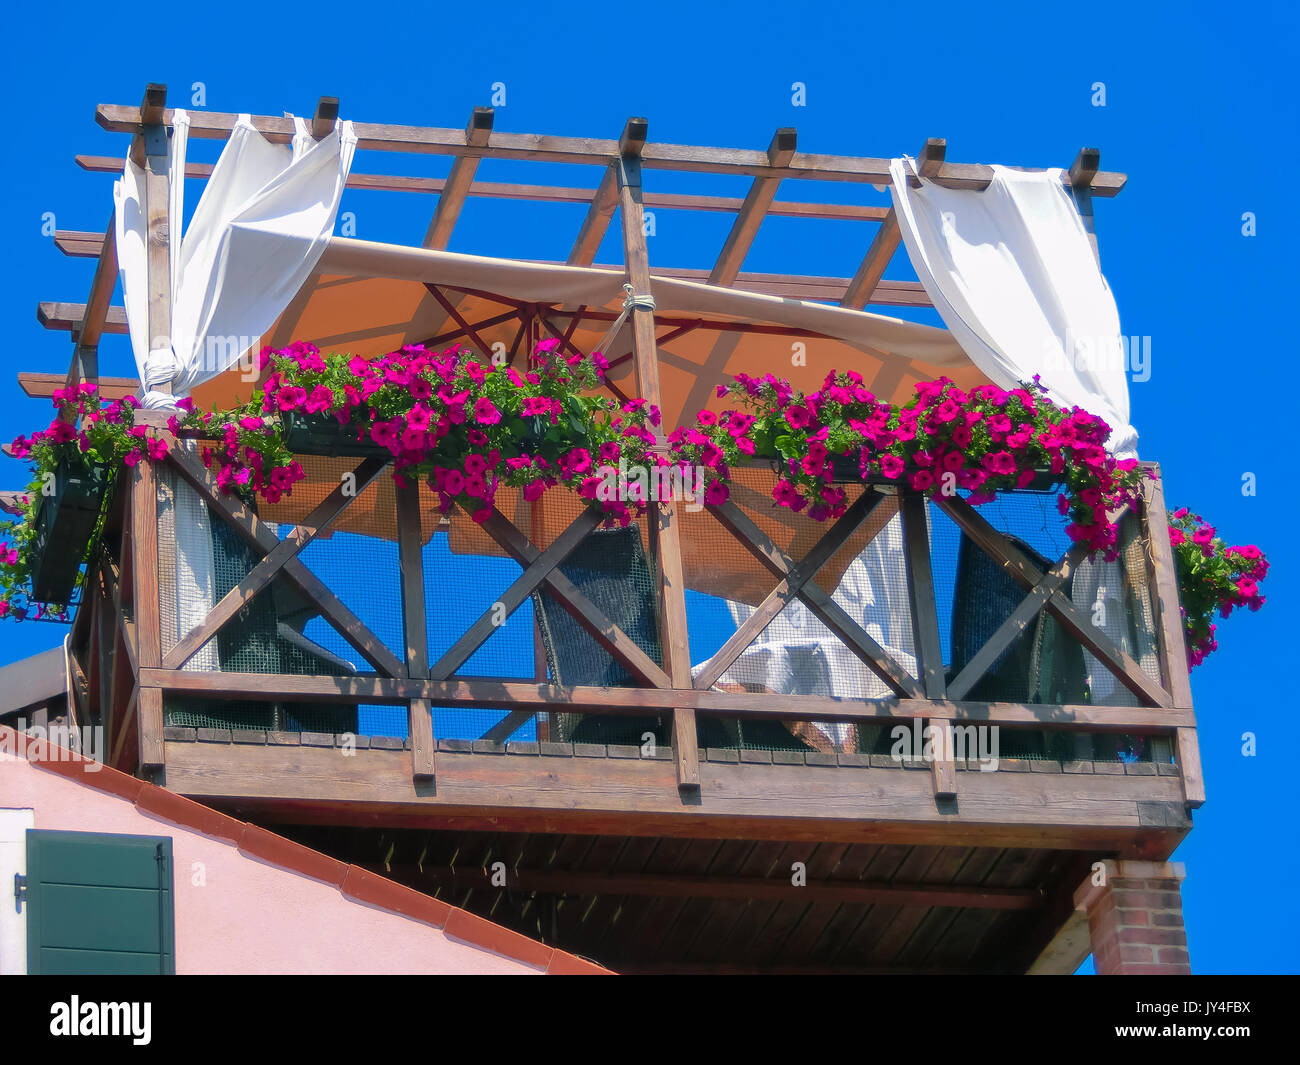 Burano, Italy - May 10, 2014: The original wooden veranda with table and chairs Stock Photo